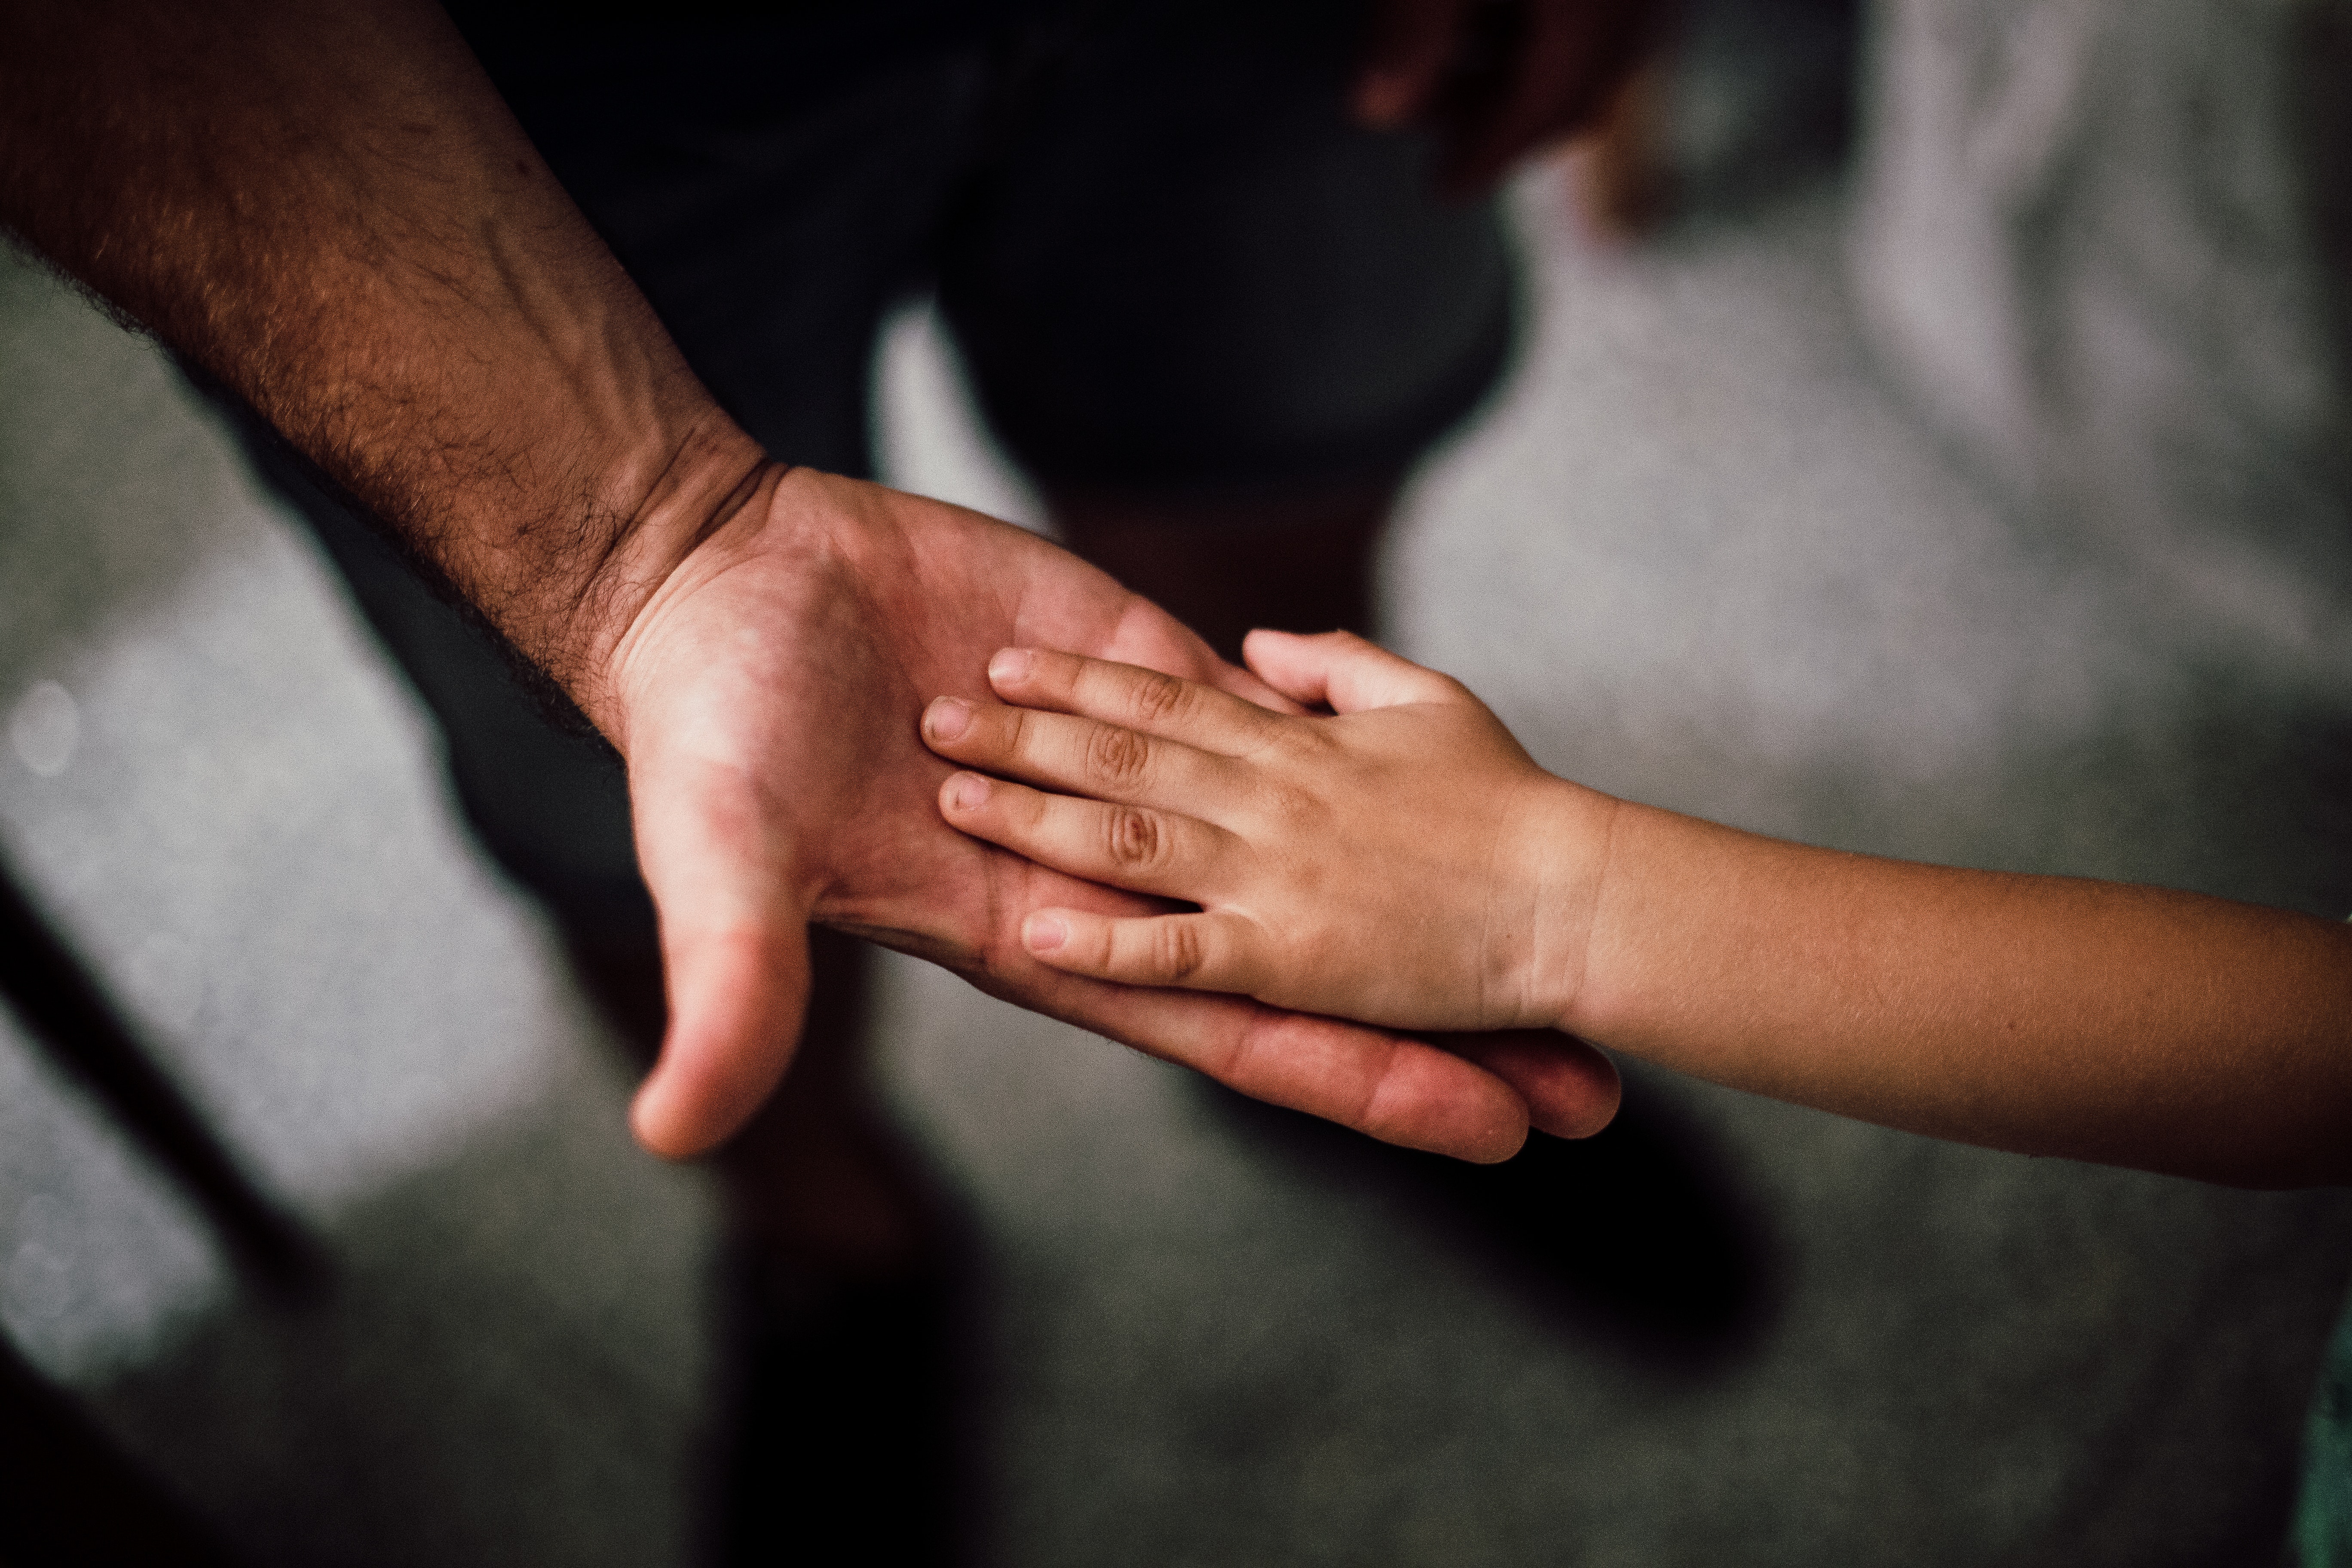 A child's hand in an adult's. Image by Juan Pablo Serrano Arenas via Pexels.